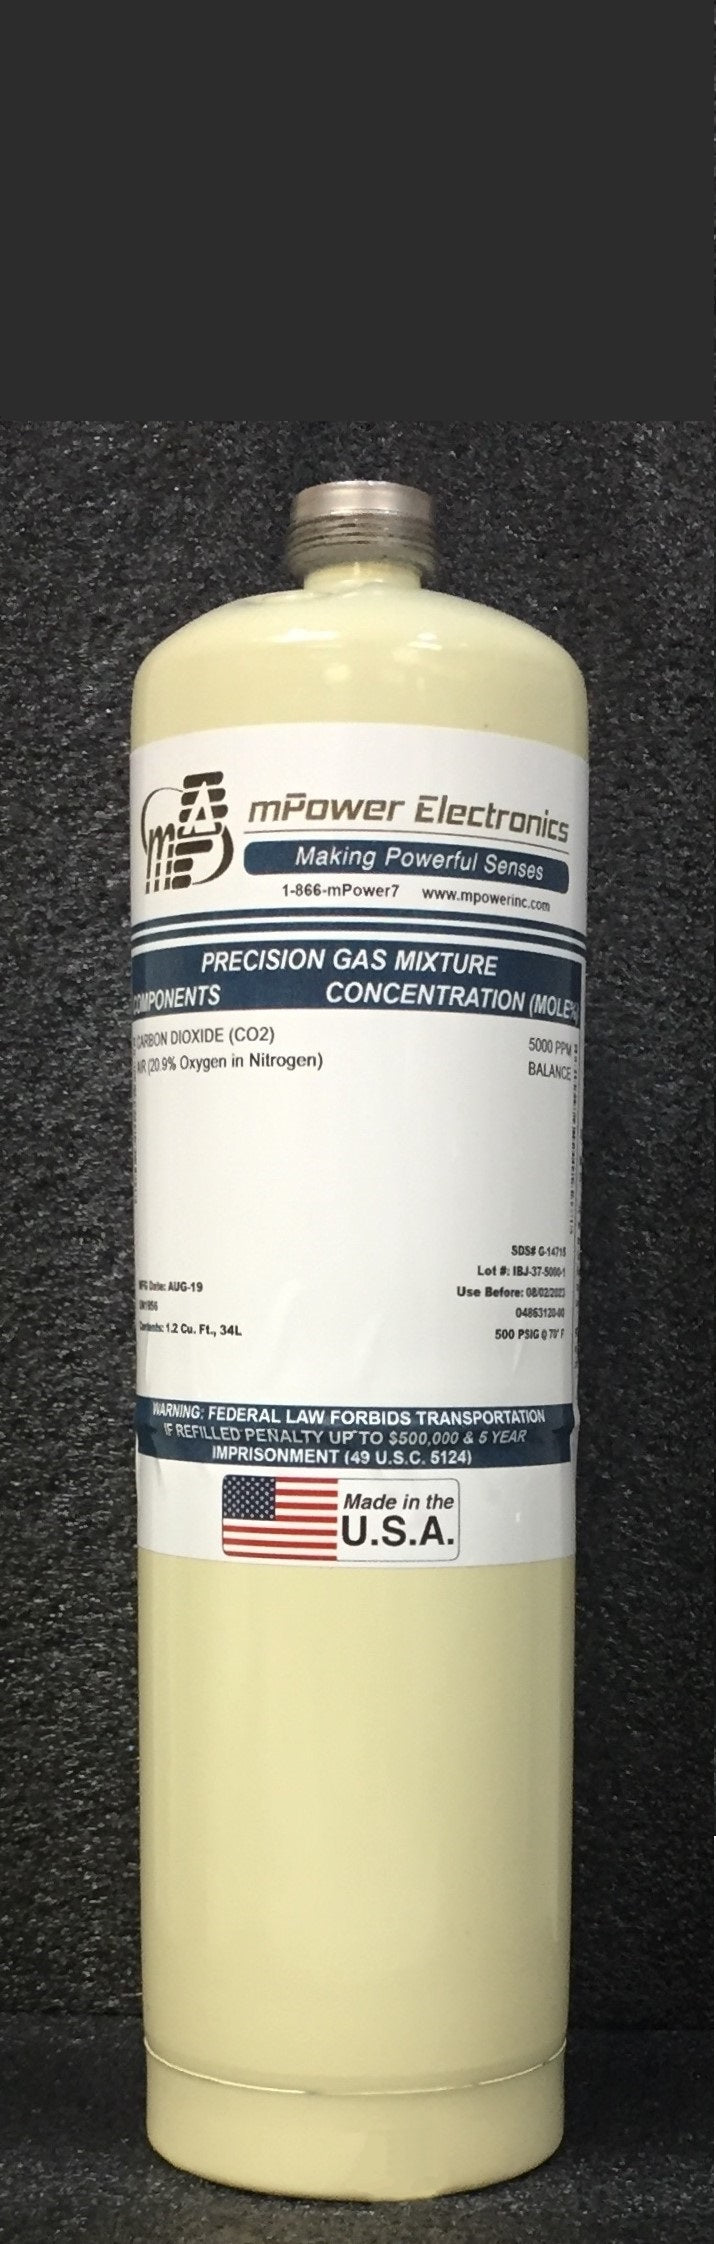 5 ppm Benzene/Bal Air, CGA-600, 34L - Disposable cylinder